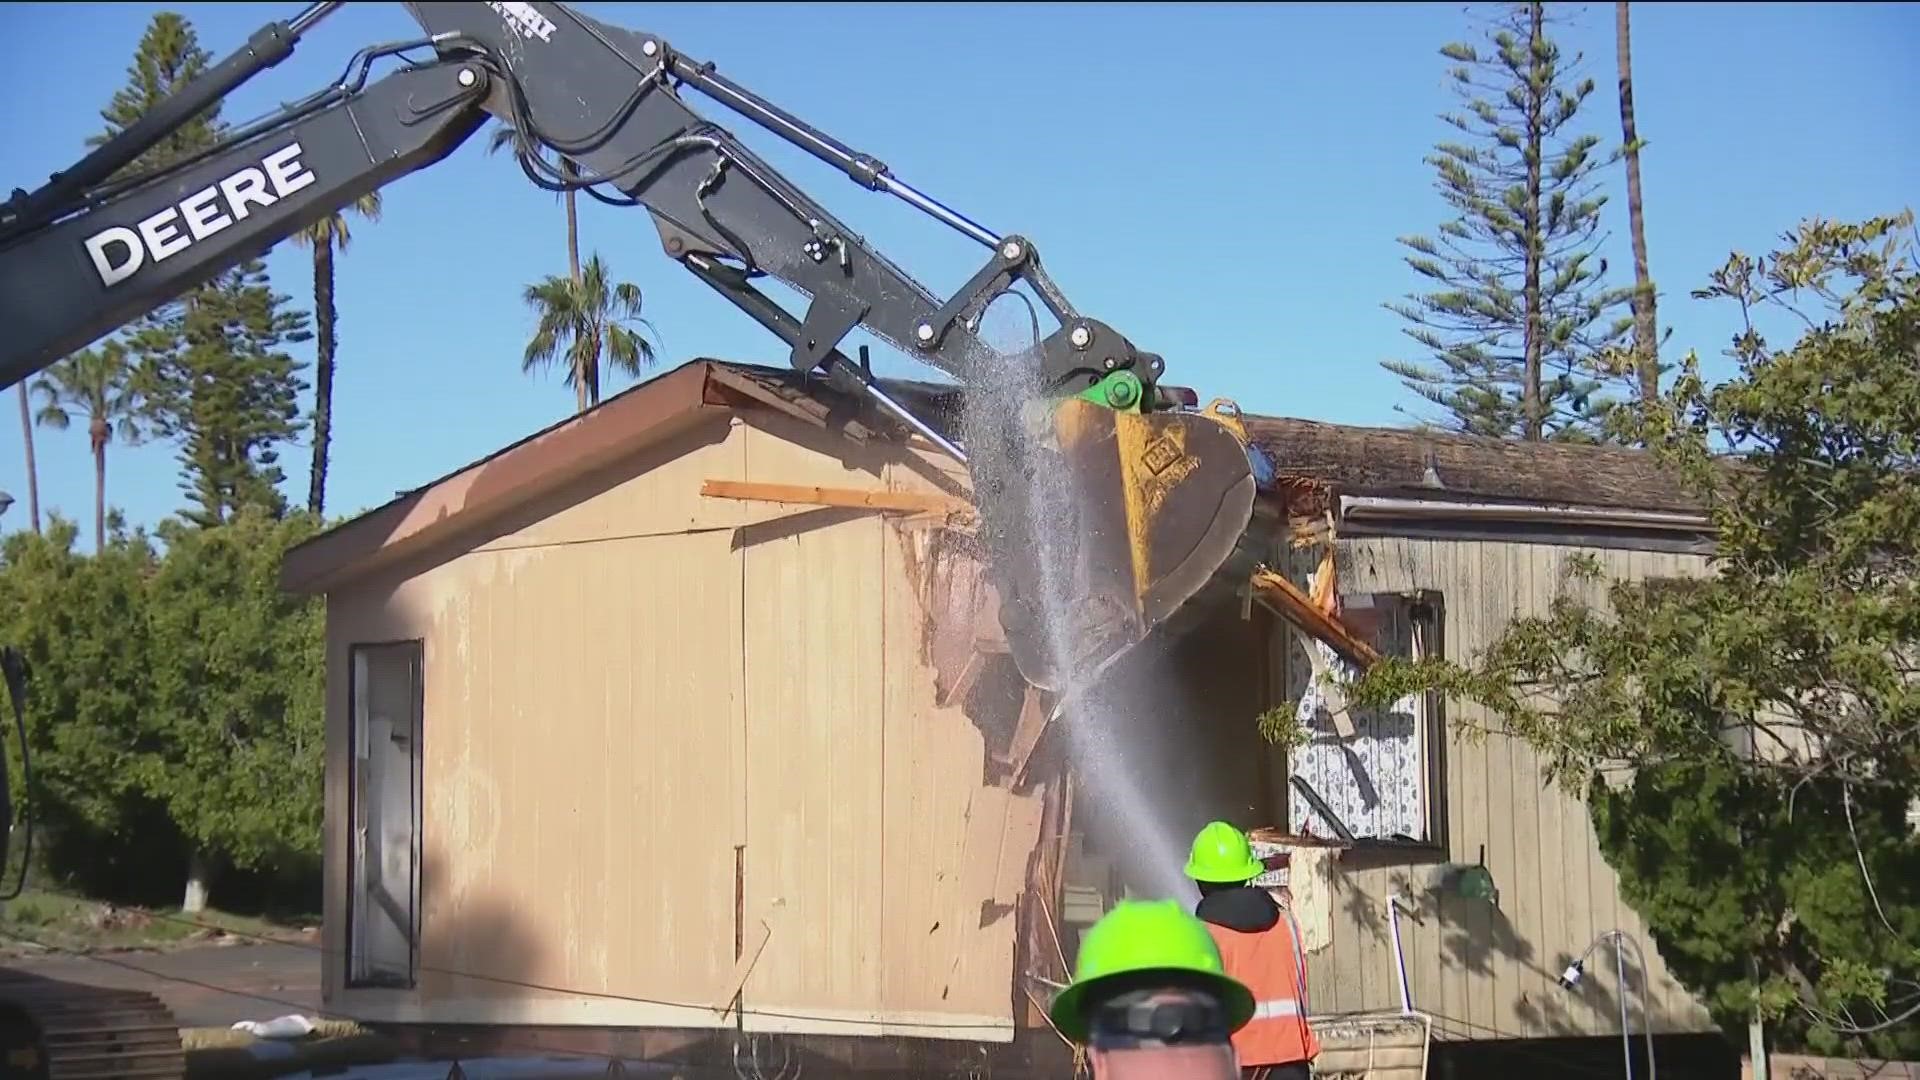 Mission Bay RV Resort is celebrating the long-awaited cleanup of mobile homes near De Anza Cove.